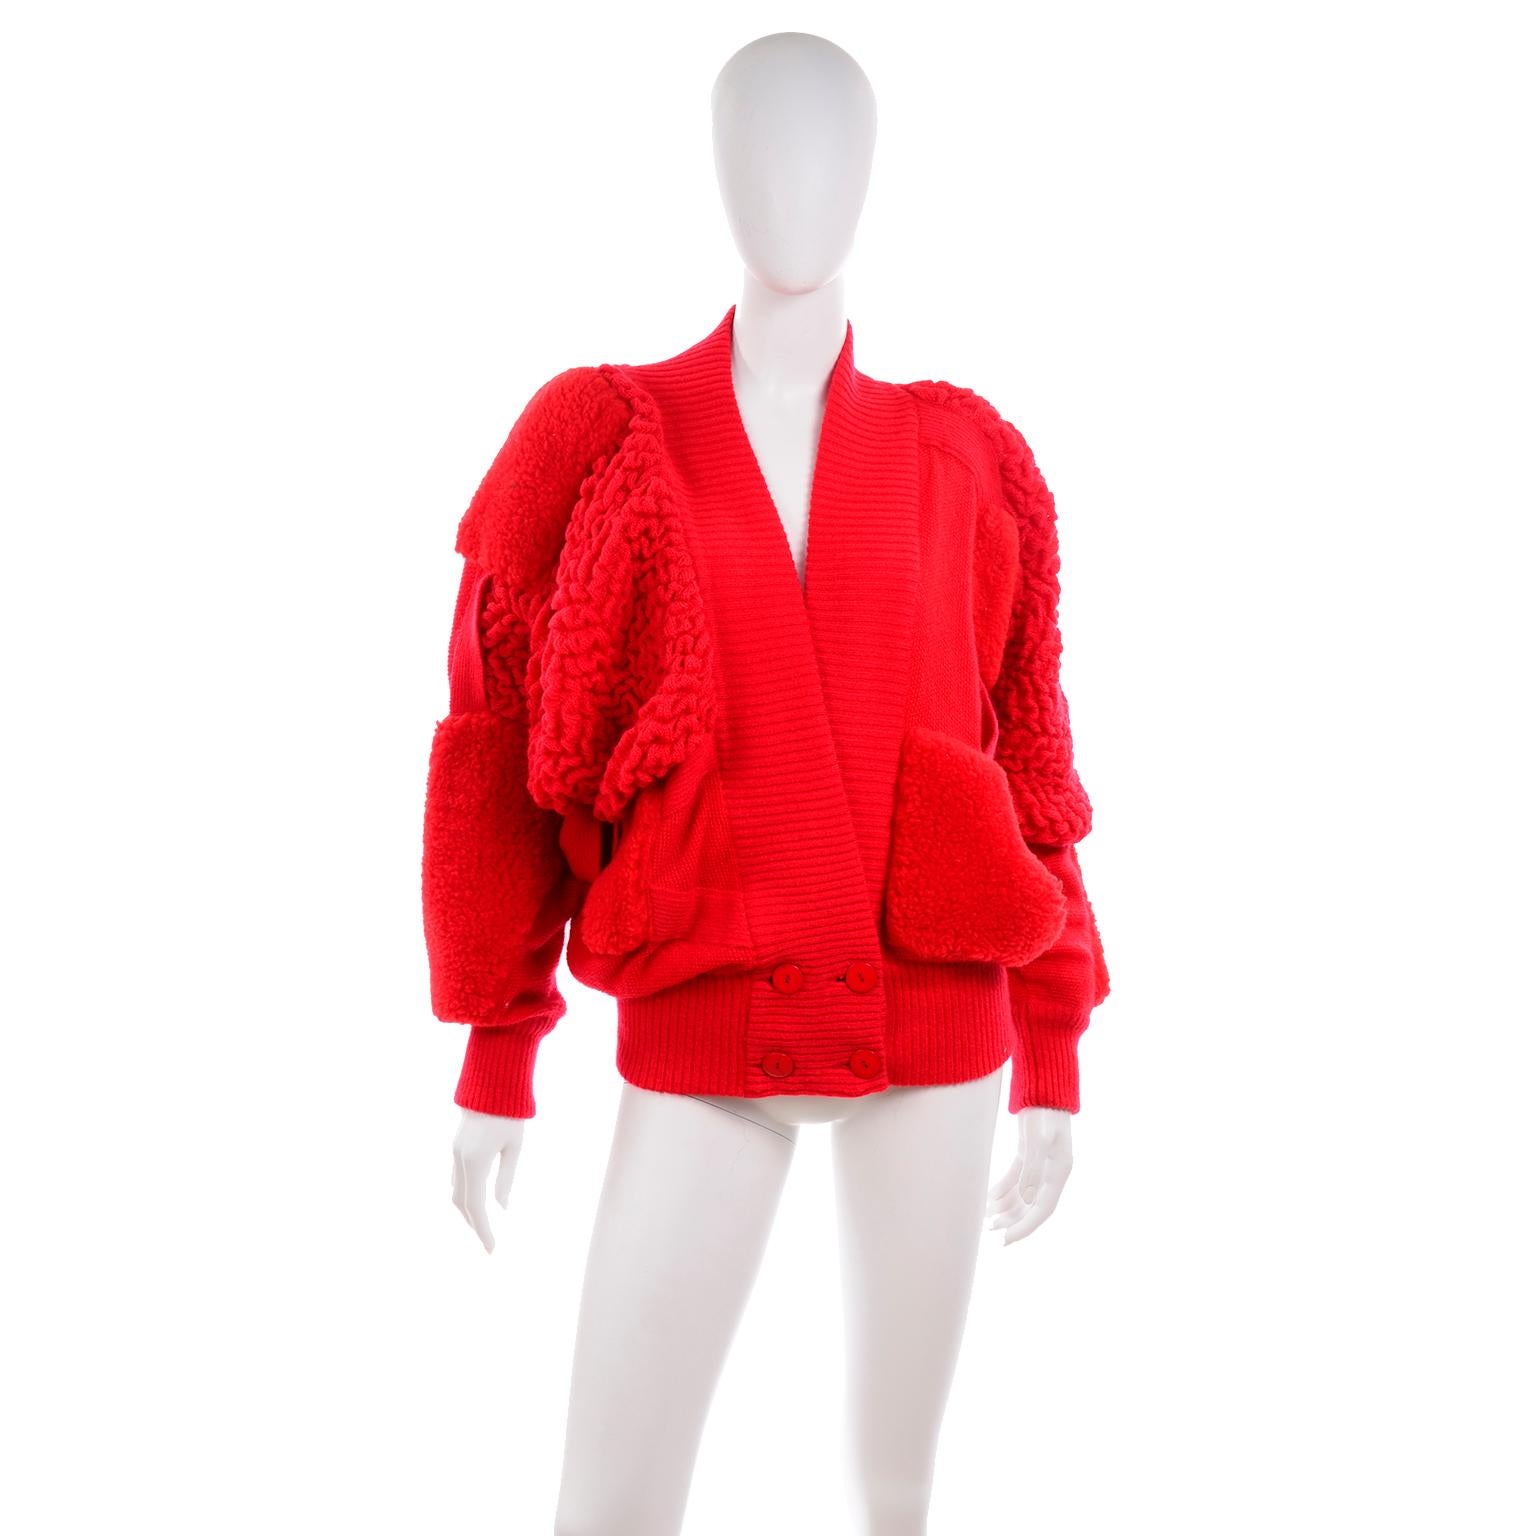 This incredible vintage red avant garde sweater was designed for Escada in the early 1980's.  This very unique double breasted sweater is patched with different materials and yarns and buttons near the hips. We love the dramatic dolman style sleeves